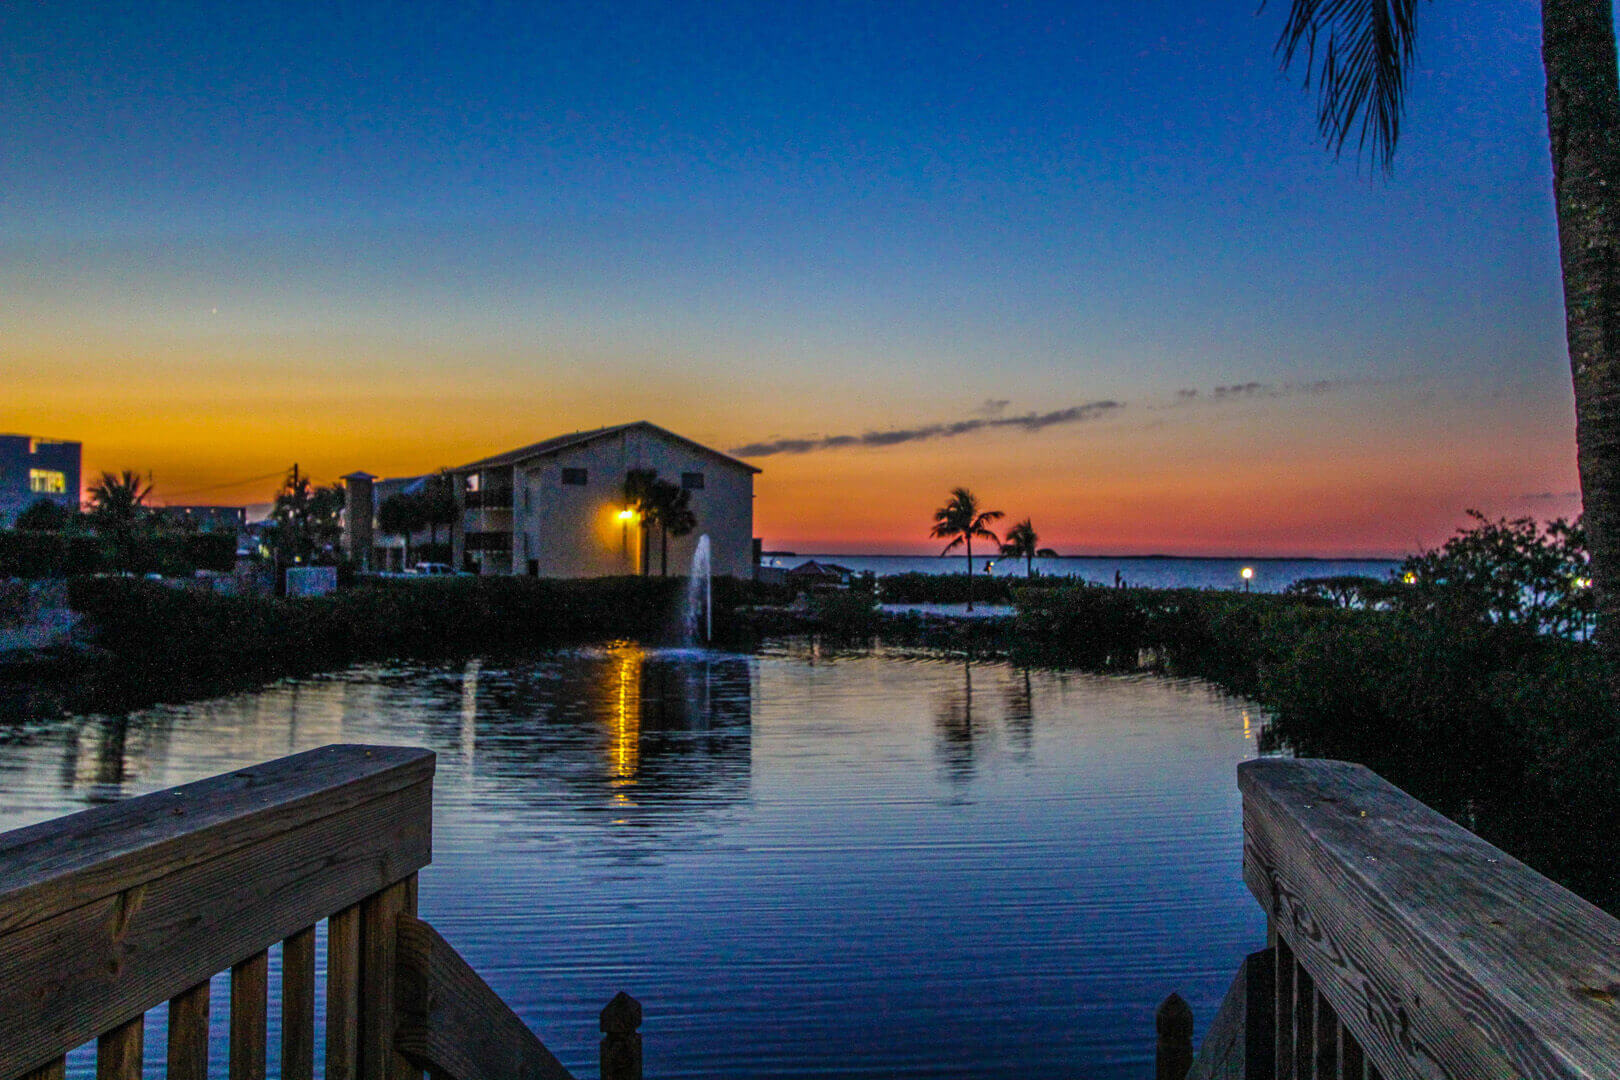 A lovely sunset view from VRI's Florida Bay Club in Florida.